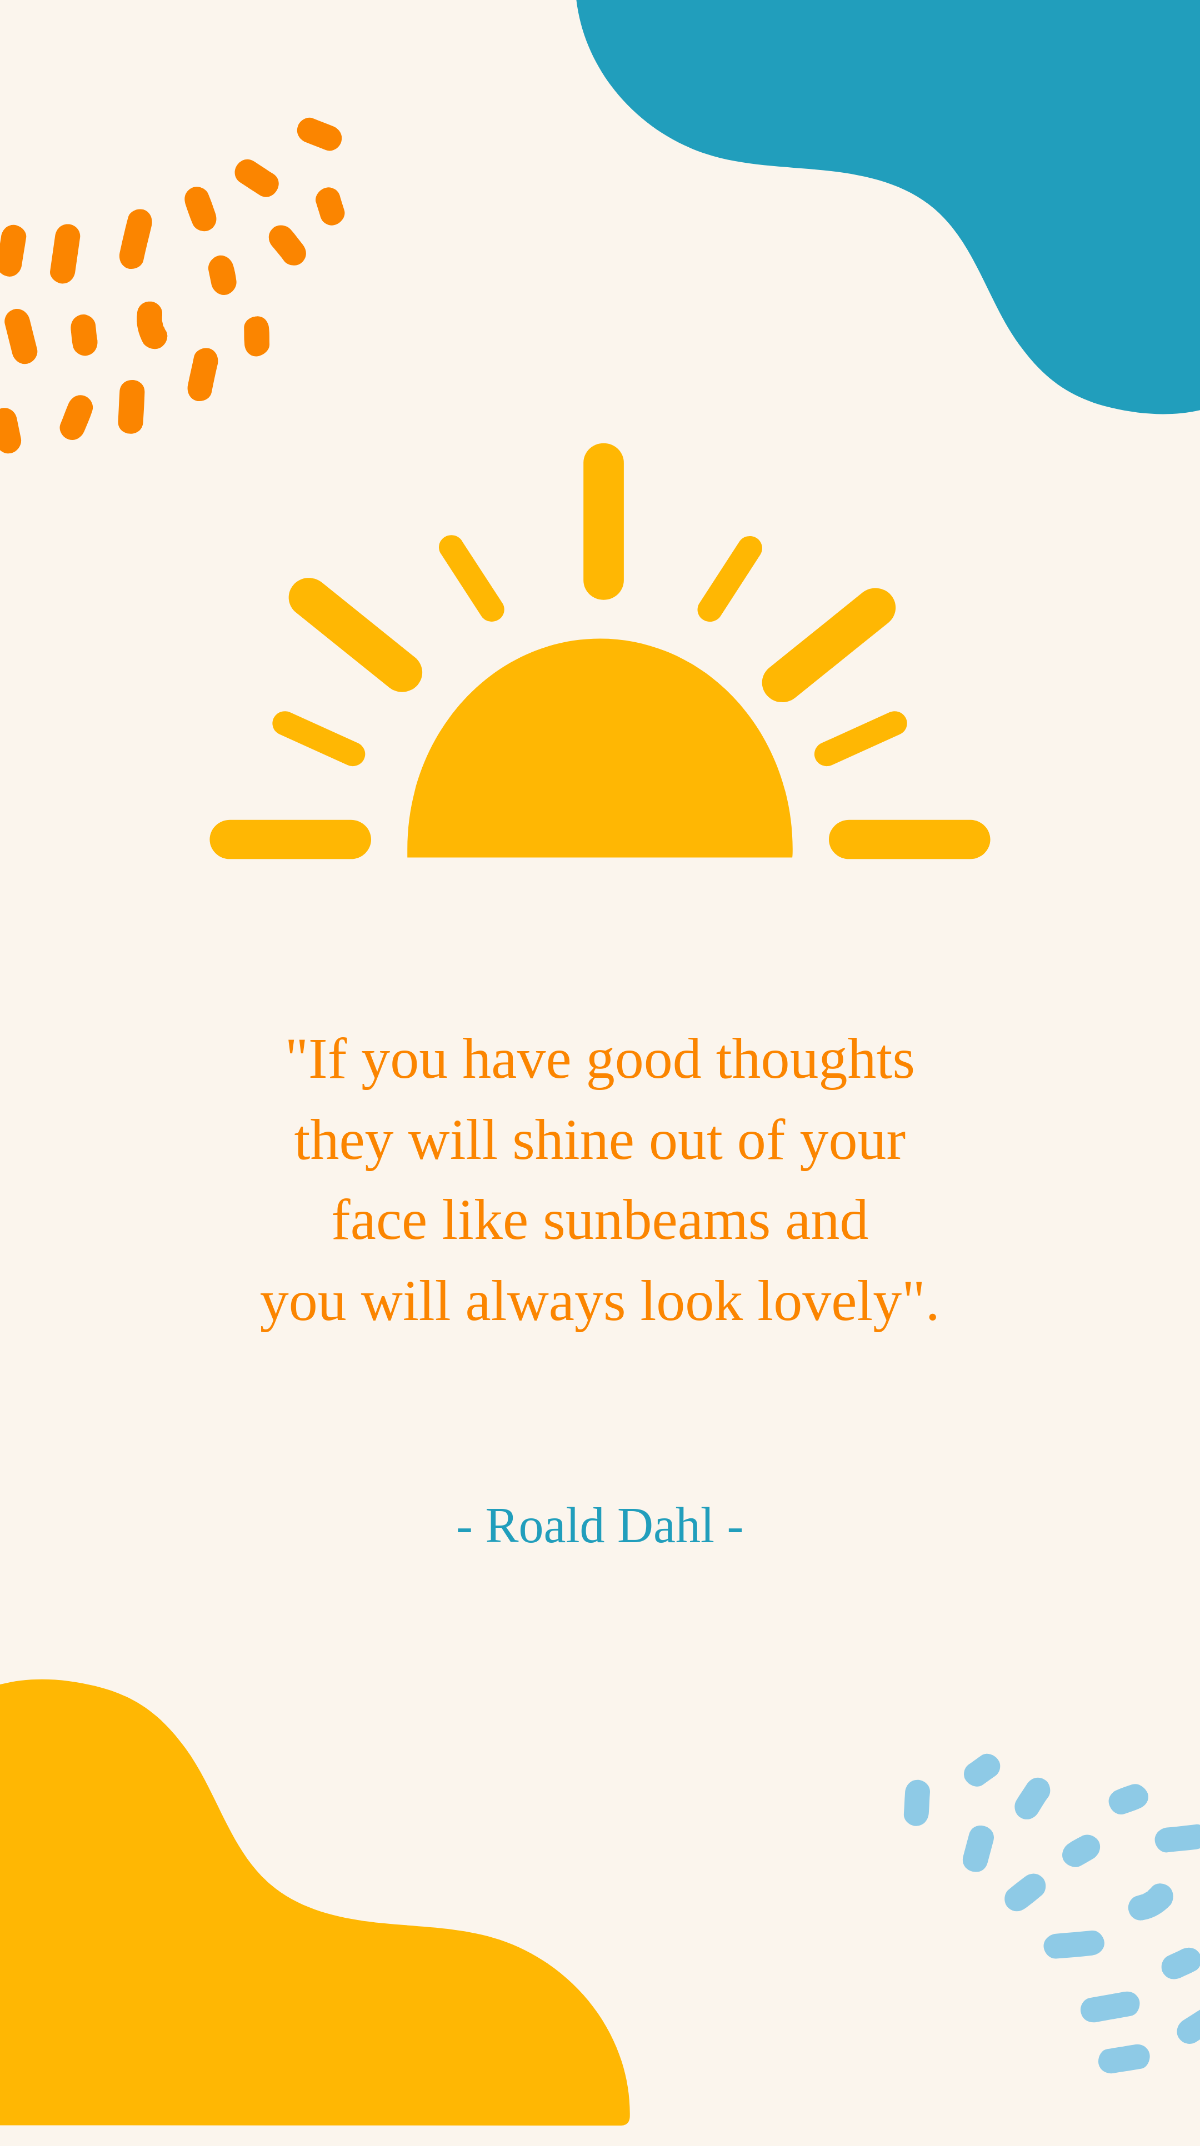 Roald Dahl - “If you have good thoughts they will shine out of your face like sunbeams and you will always look lovely.” Template